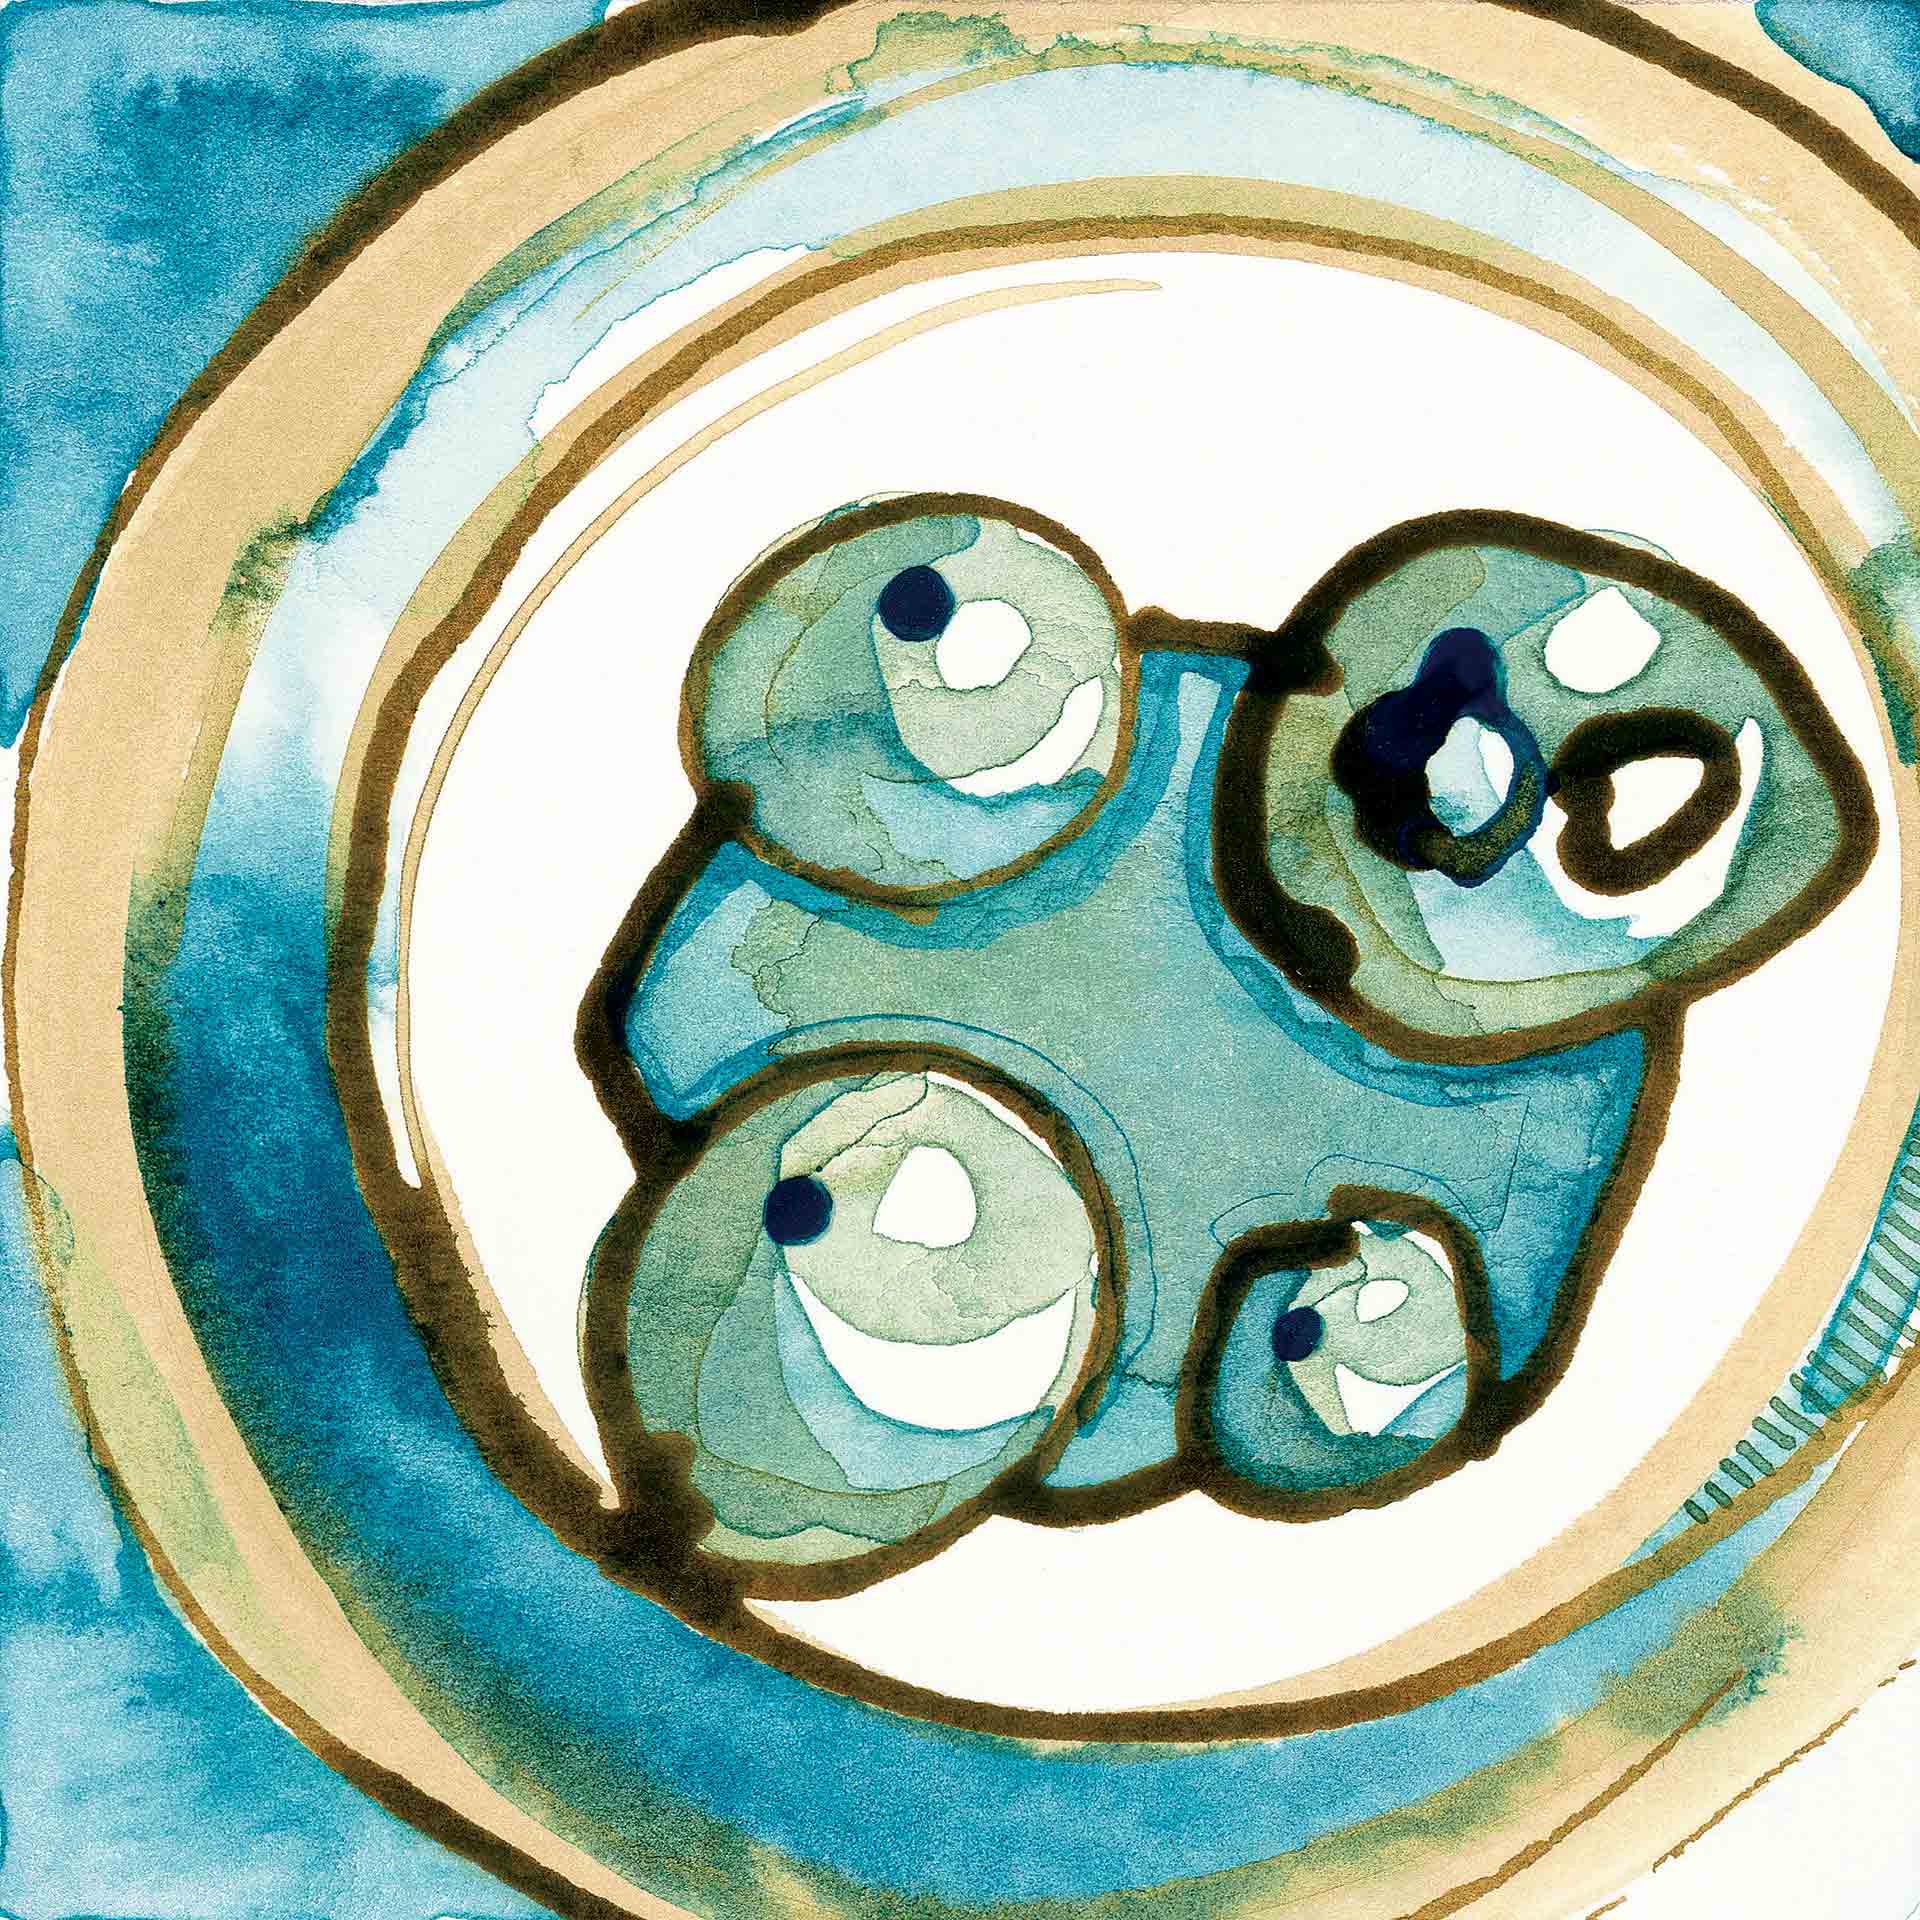 Together, What Connects Us? A Self-Care Practice. Square blue and brown abstract watercolor with added gold leaf. This image is part of a series Barincou created for her own self-care after attending the emotions of healthcare professionals and oncology patients.